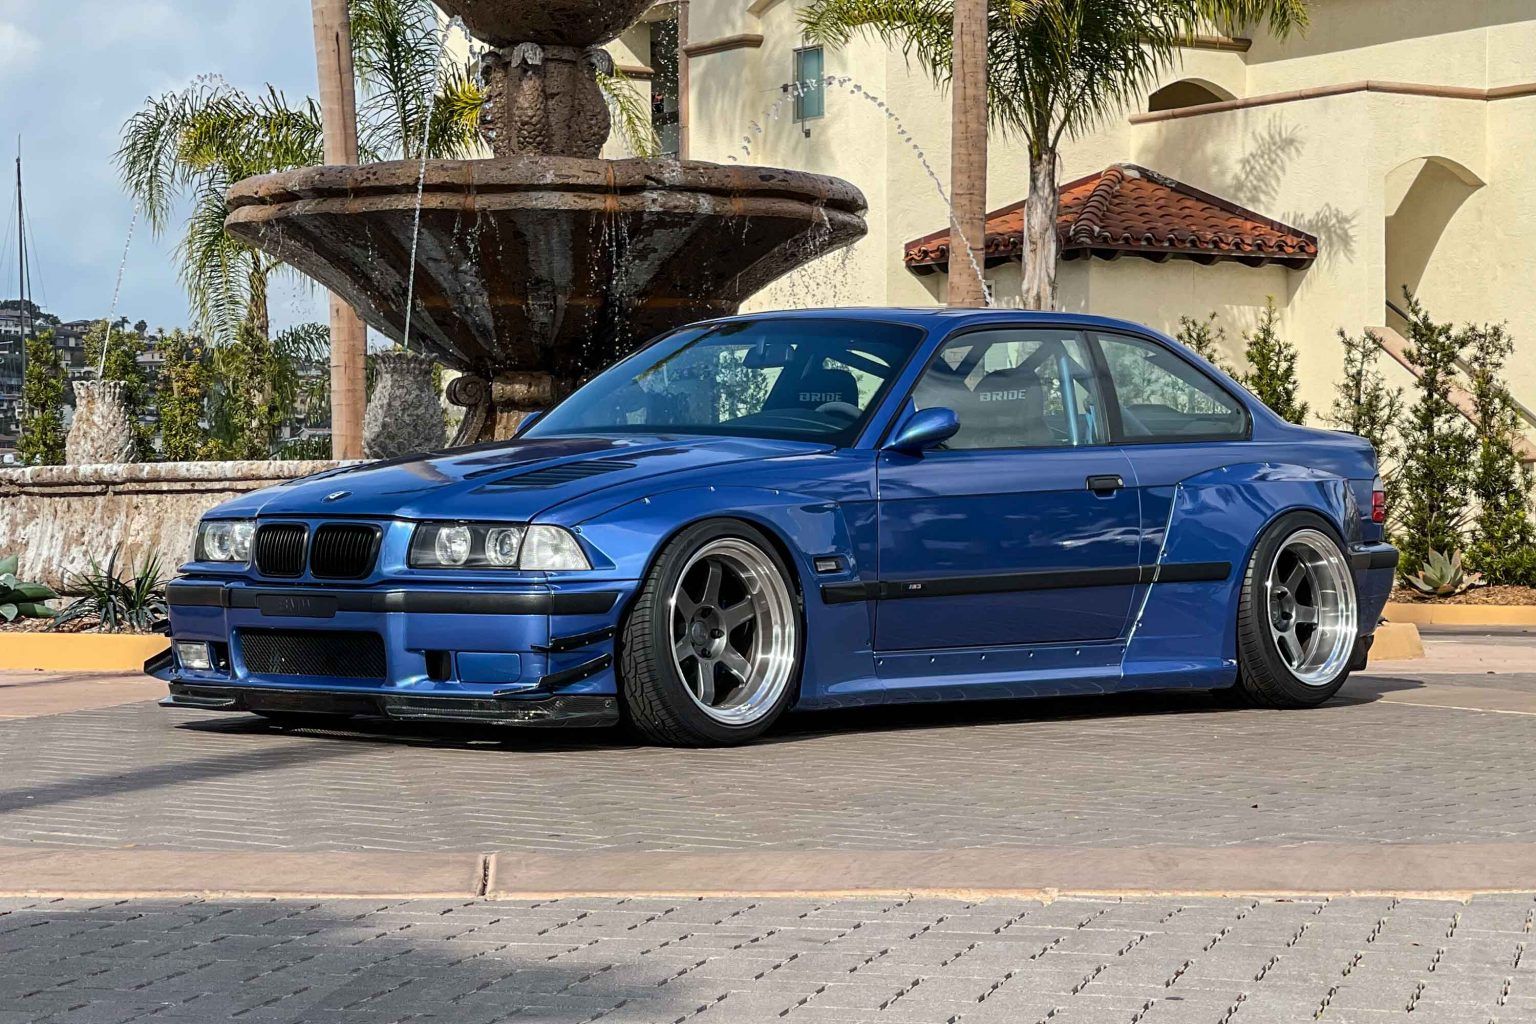 BMW E36 M3 Is A Head-Turner Of A Different Breed